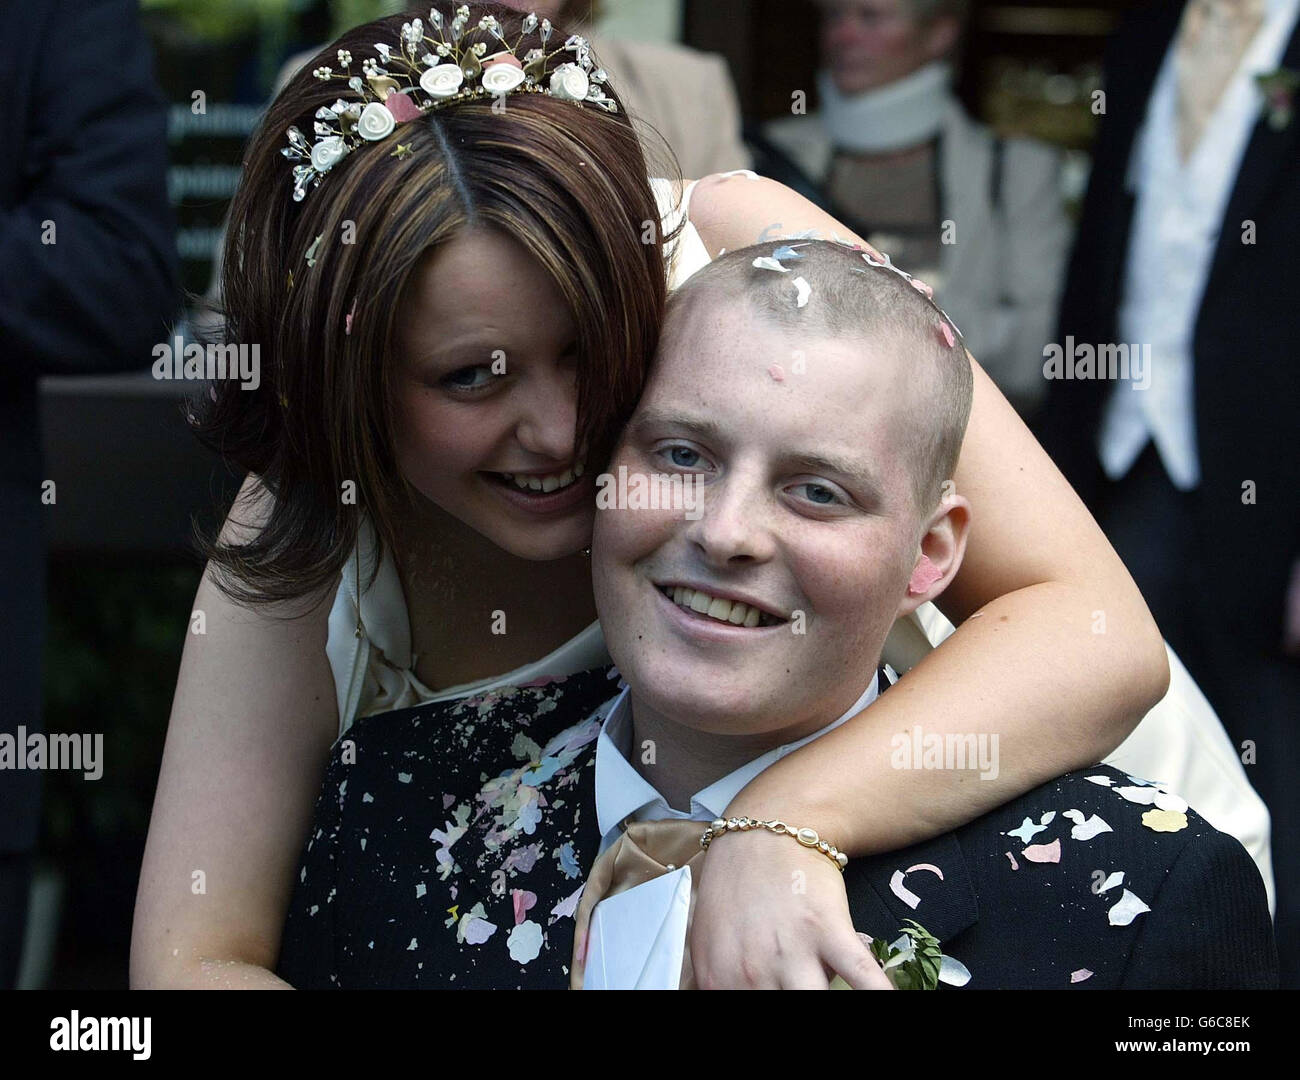 Terminally-ill Leukaemia sufferer Martin Black married Susan Smith at Gateshead Registry Office. The couple, both 19, decided to bring the ceremony forward by one month due to his failing health. They are hoping with IVF treatment to have a test-tube baby. * Susan has begun the treatment at Newcastle's Centre for Life and the couple hope she will conceive his child from sperm which was frozen before he underwent intensive chemotherapy. Martin, from Felling, Gateshead, was diagnosed with leukaemia almost three years ago, shortly after he met Susan from nearby Donwell, Washington. He was in Stock Photo